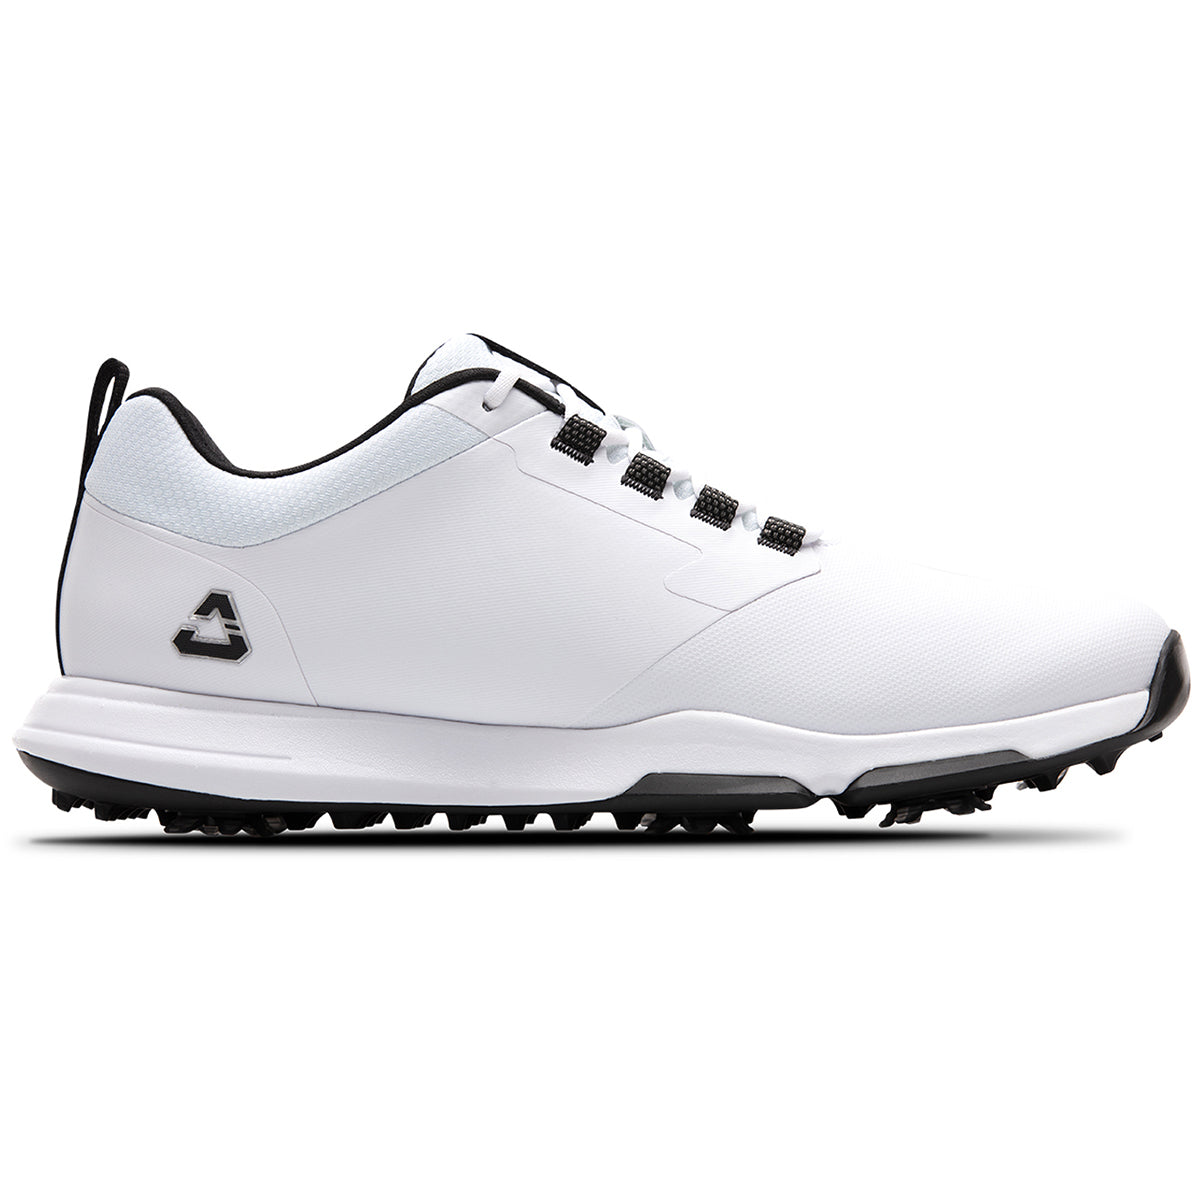 cuater-the-ringer-golf-shoes-4mr215-white